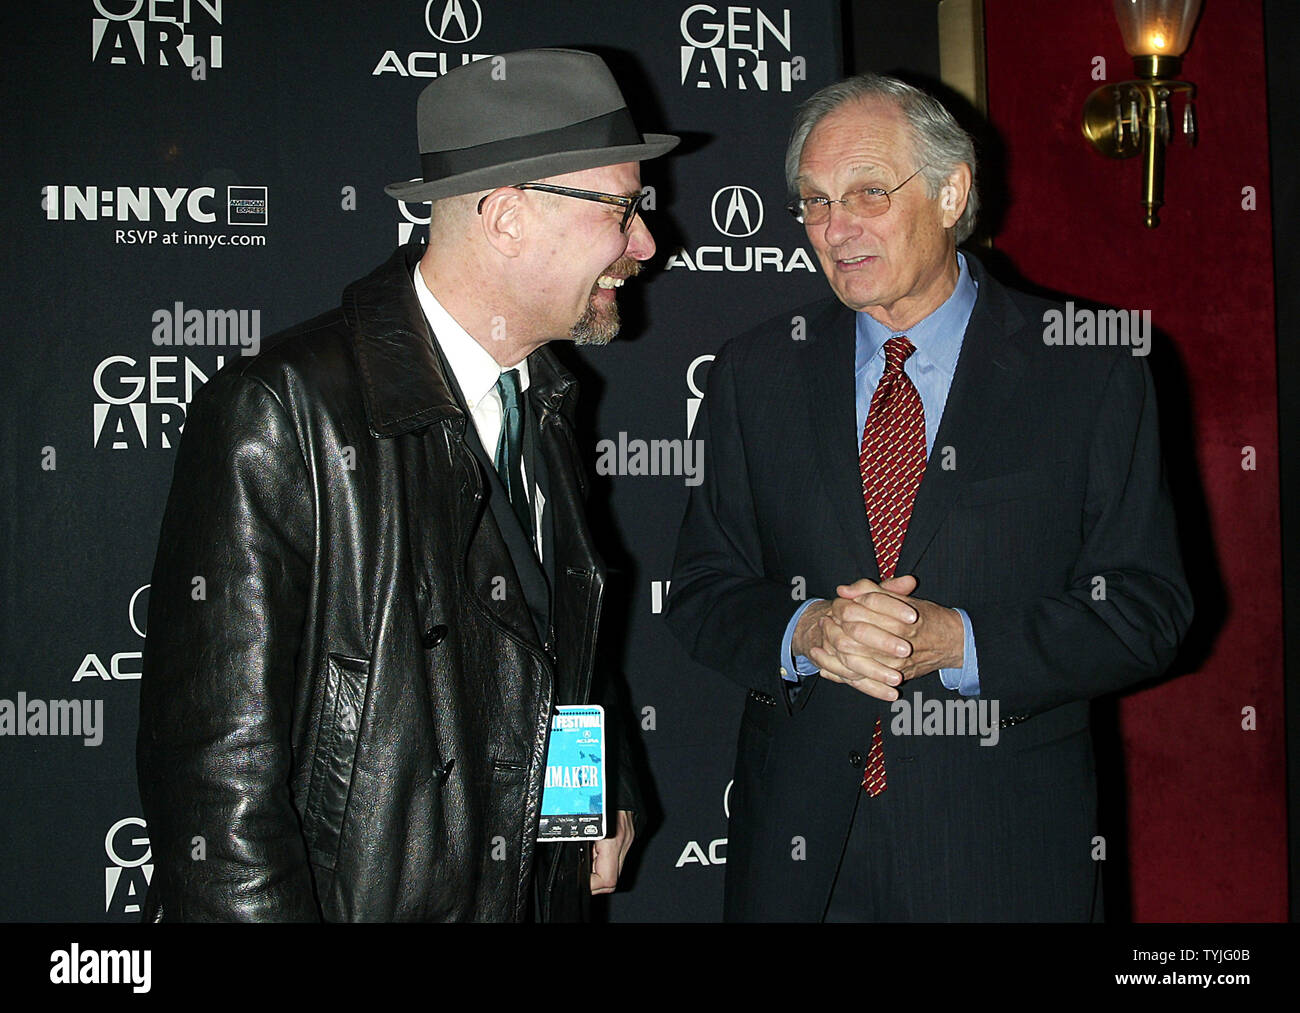 Terry Kinney (L) and Alan Alda arrive at the Gen Art Film Festival Premiere of 'Diminished Capacity' at the Ziegfeld Theater in New York on April 2, 2008.   (UPI Photo/Laura Cavanaugh) Stock Photo